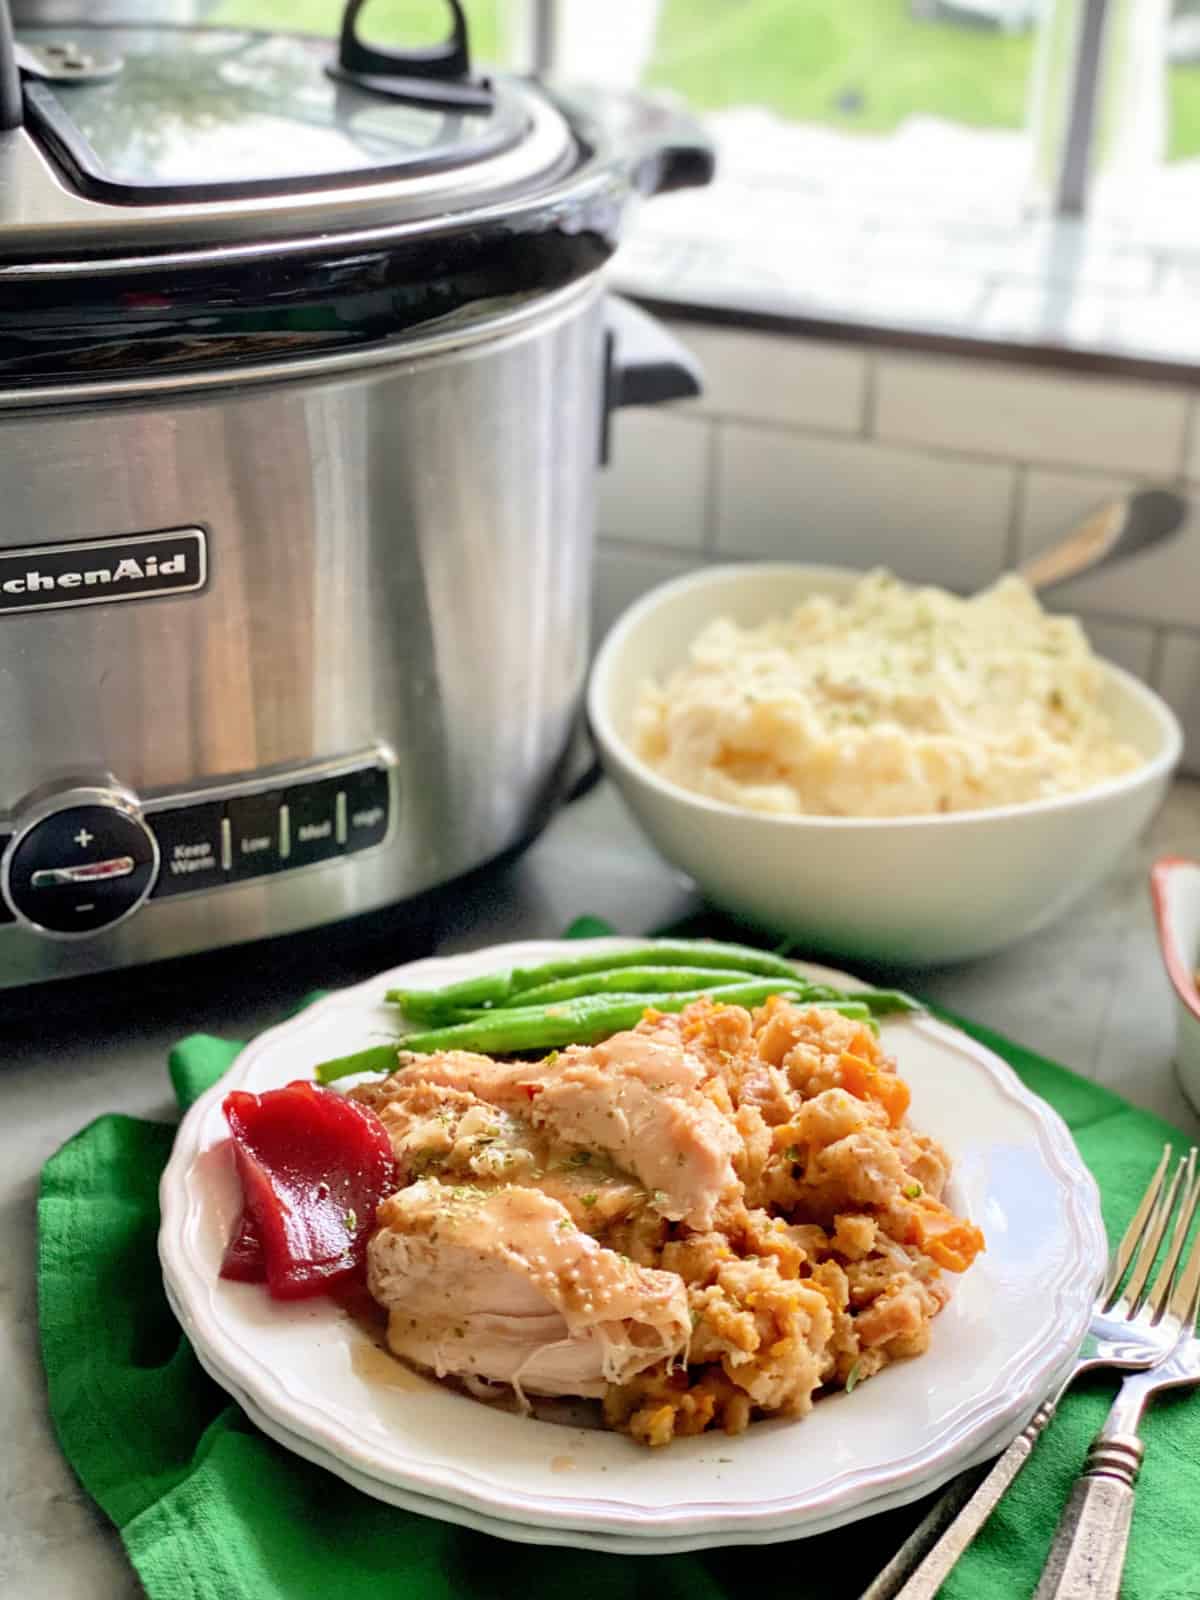 White plate filled with turkey, stuffing, cranberry sauce, and green beans with a slow cooker on the backgournd.